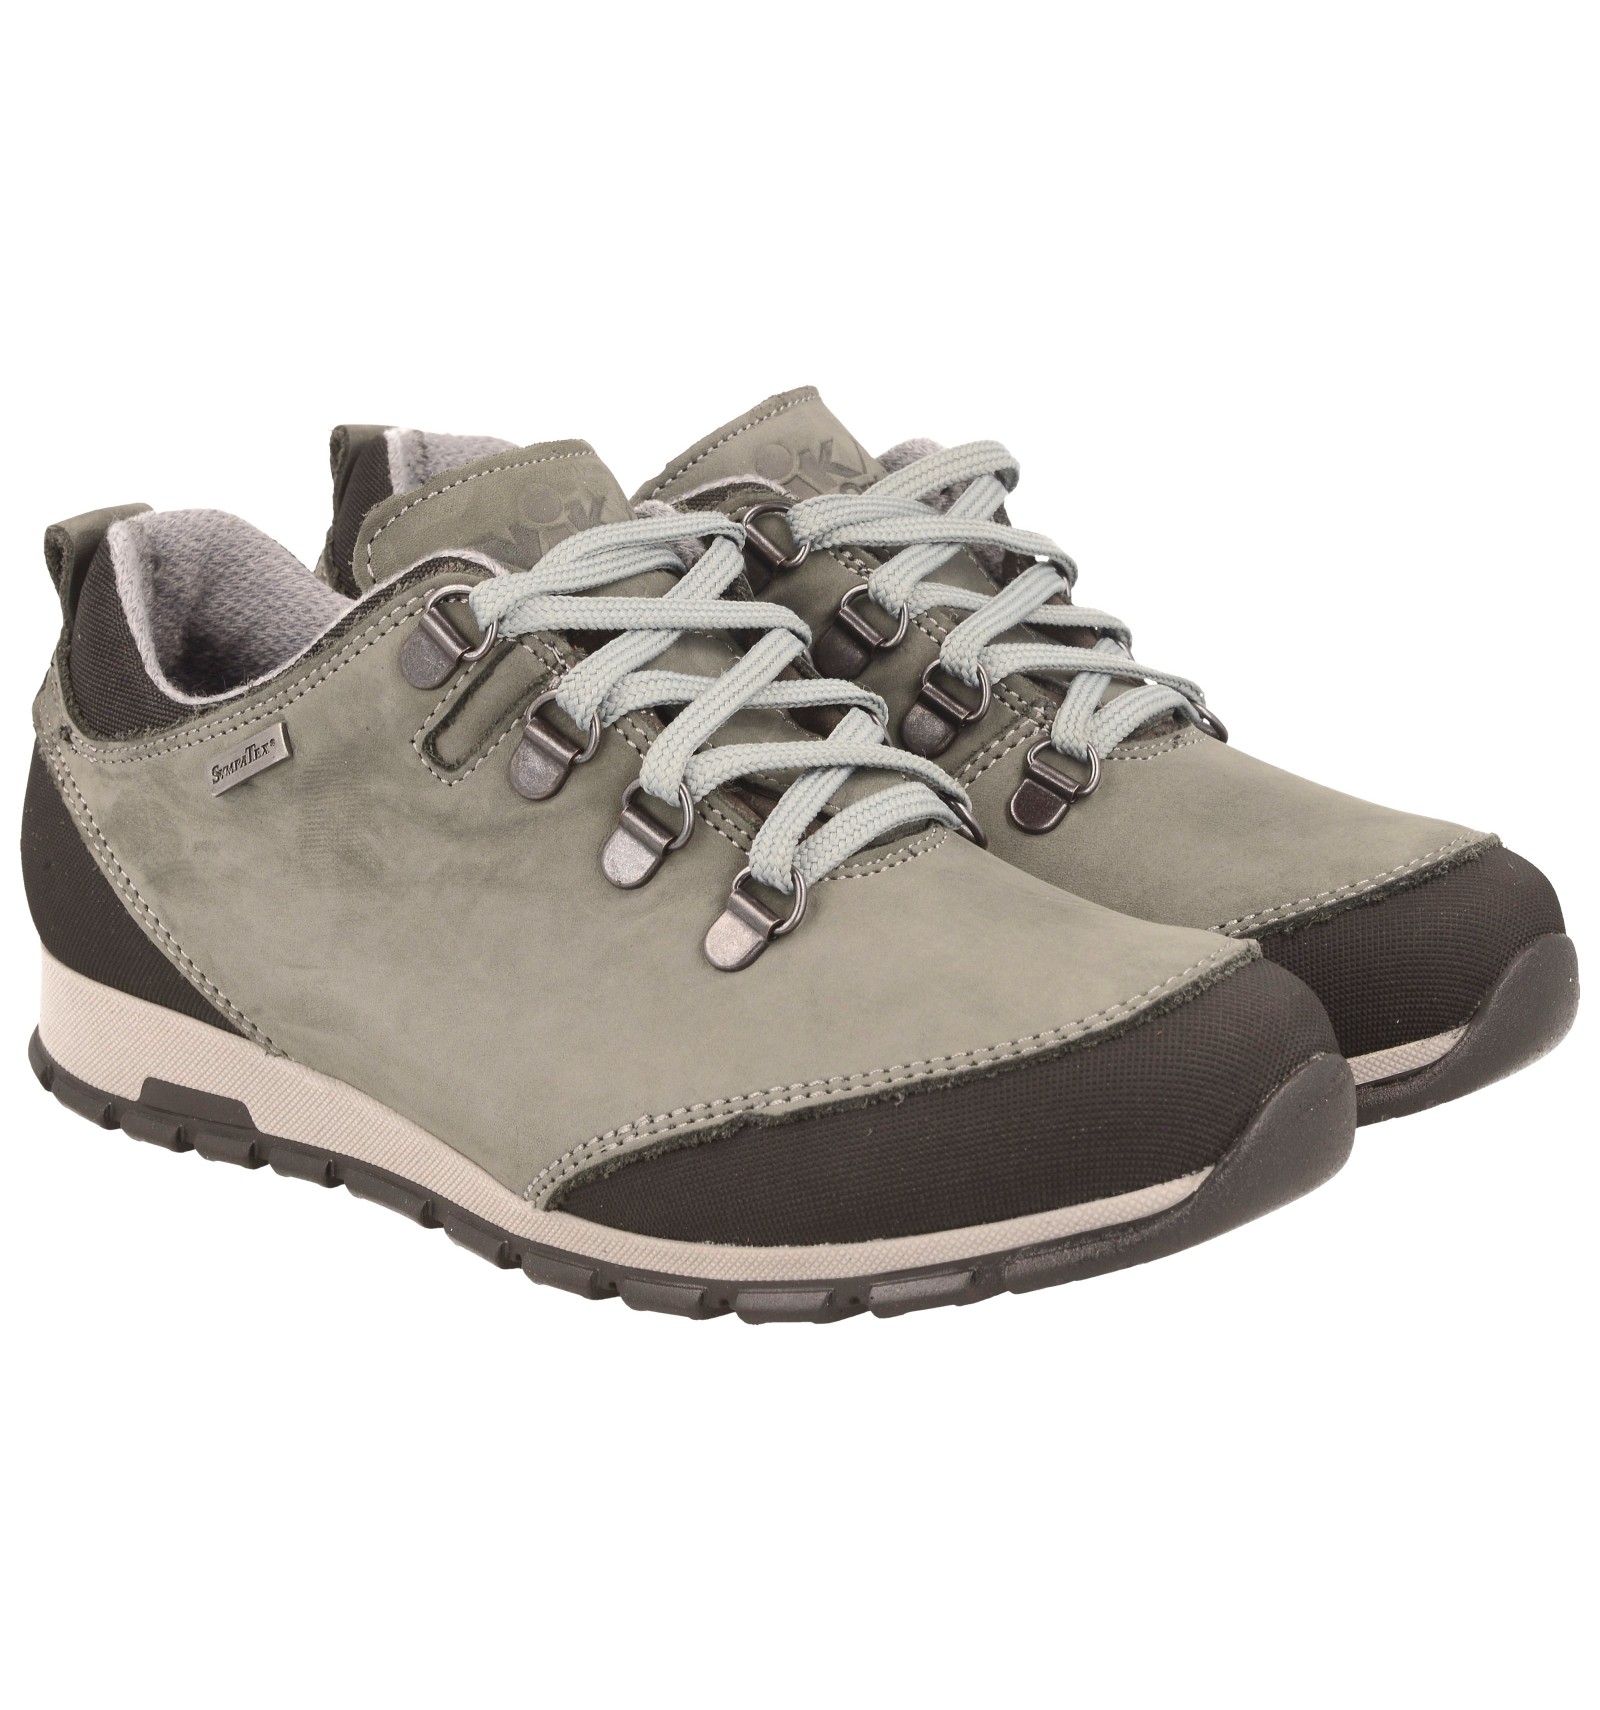 Women's hiking shoes, GREY leather, breathable membrane Sympatex